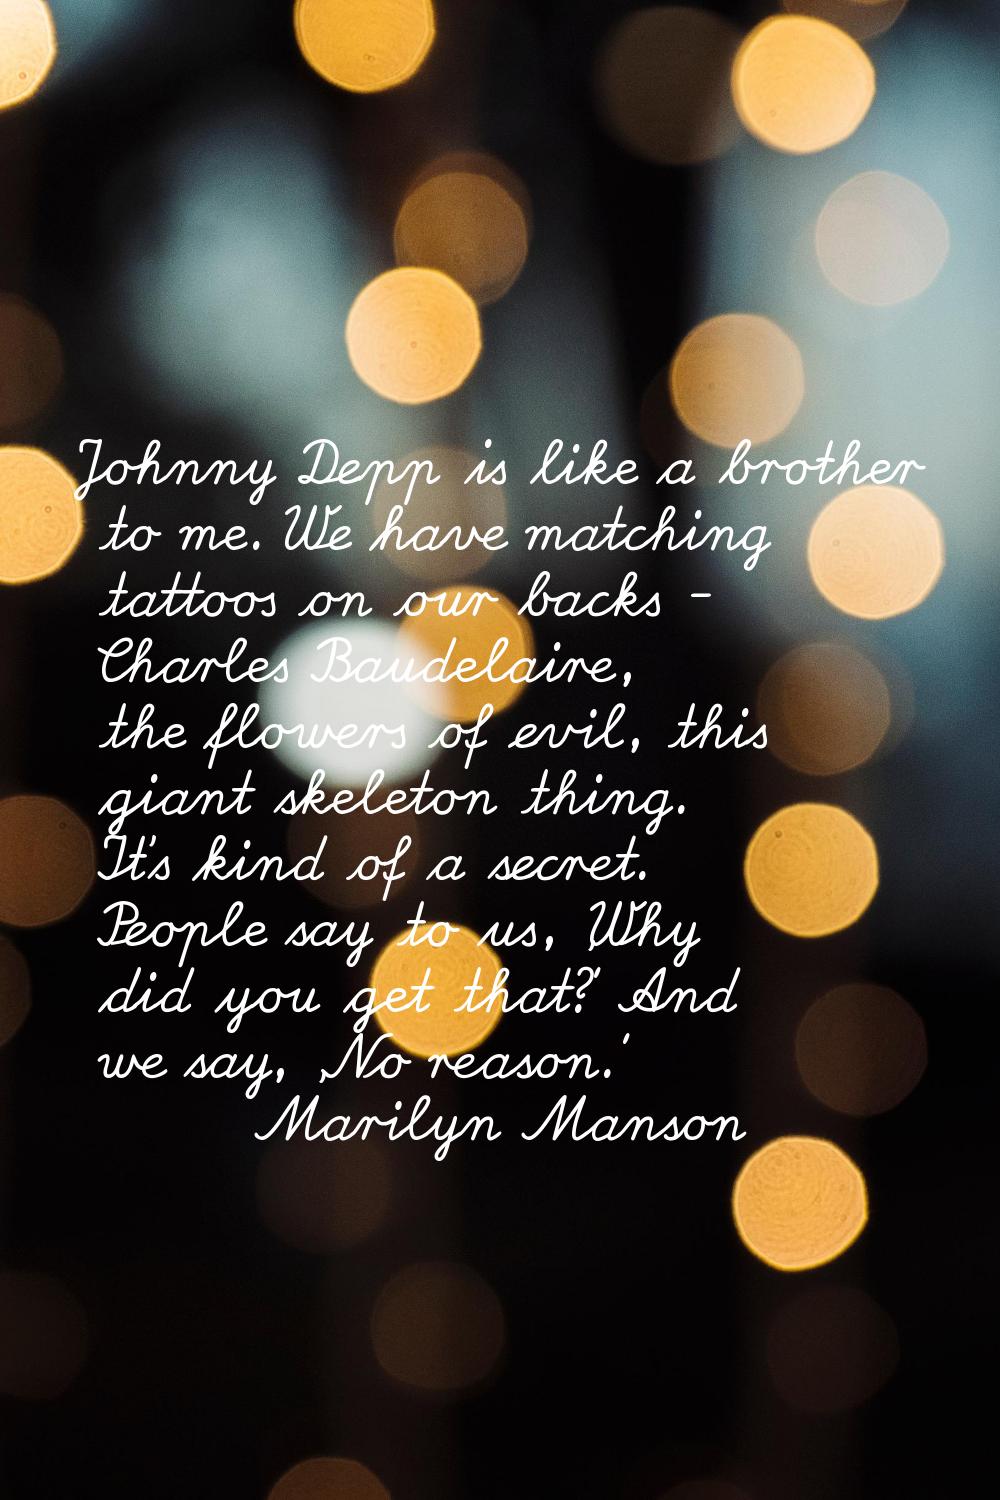 Johnny Depp is like a brother to me. We have matching tattoos on our backs - Charles Baudelaire, th